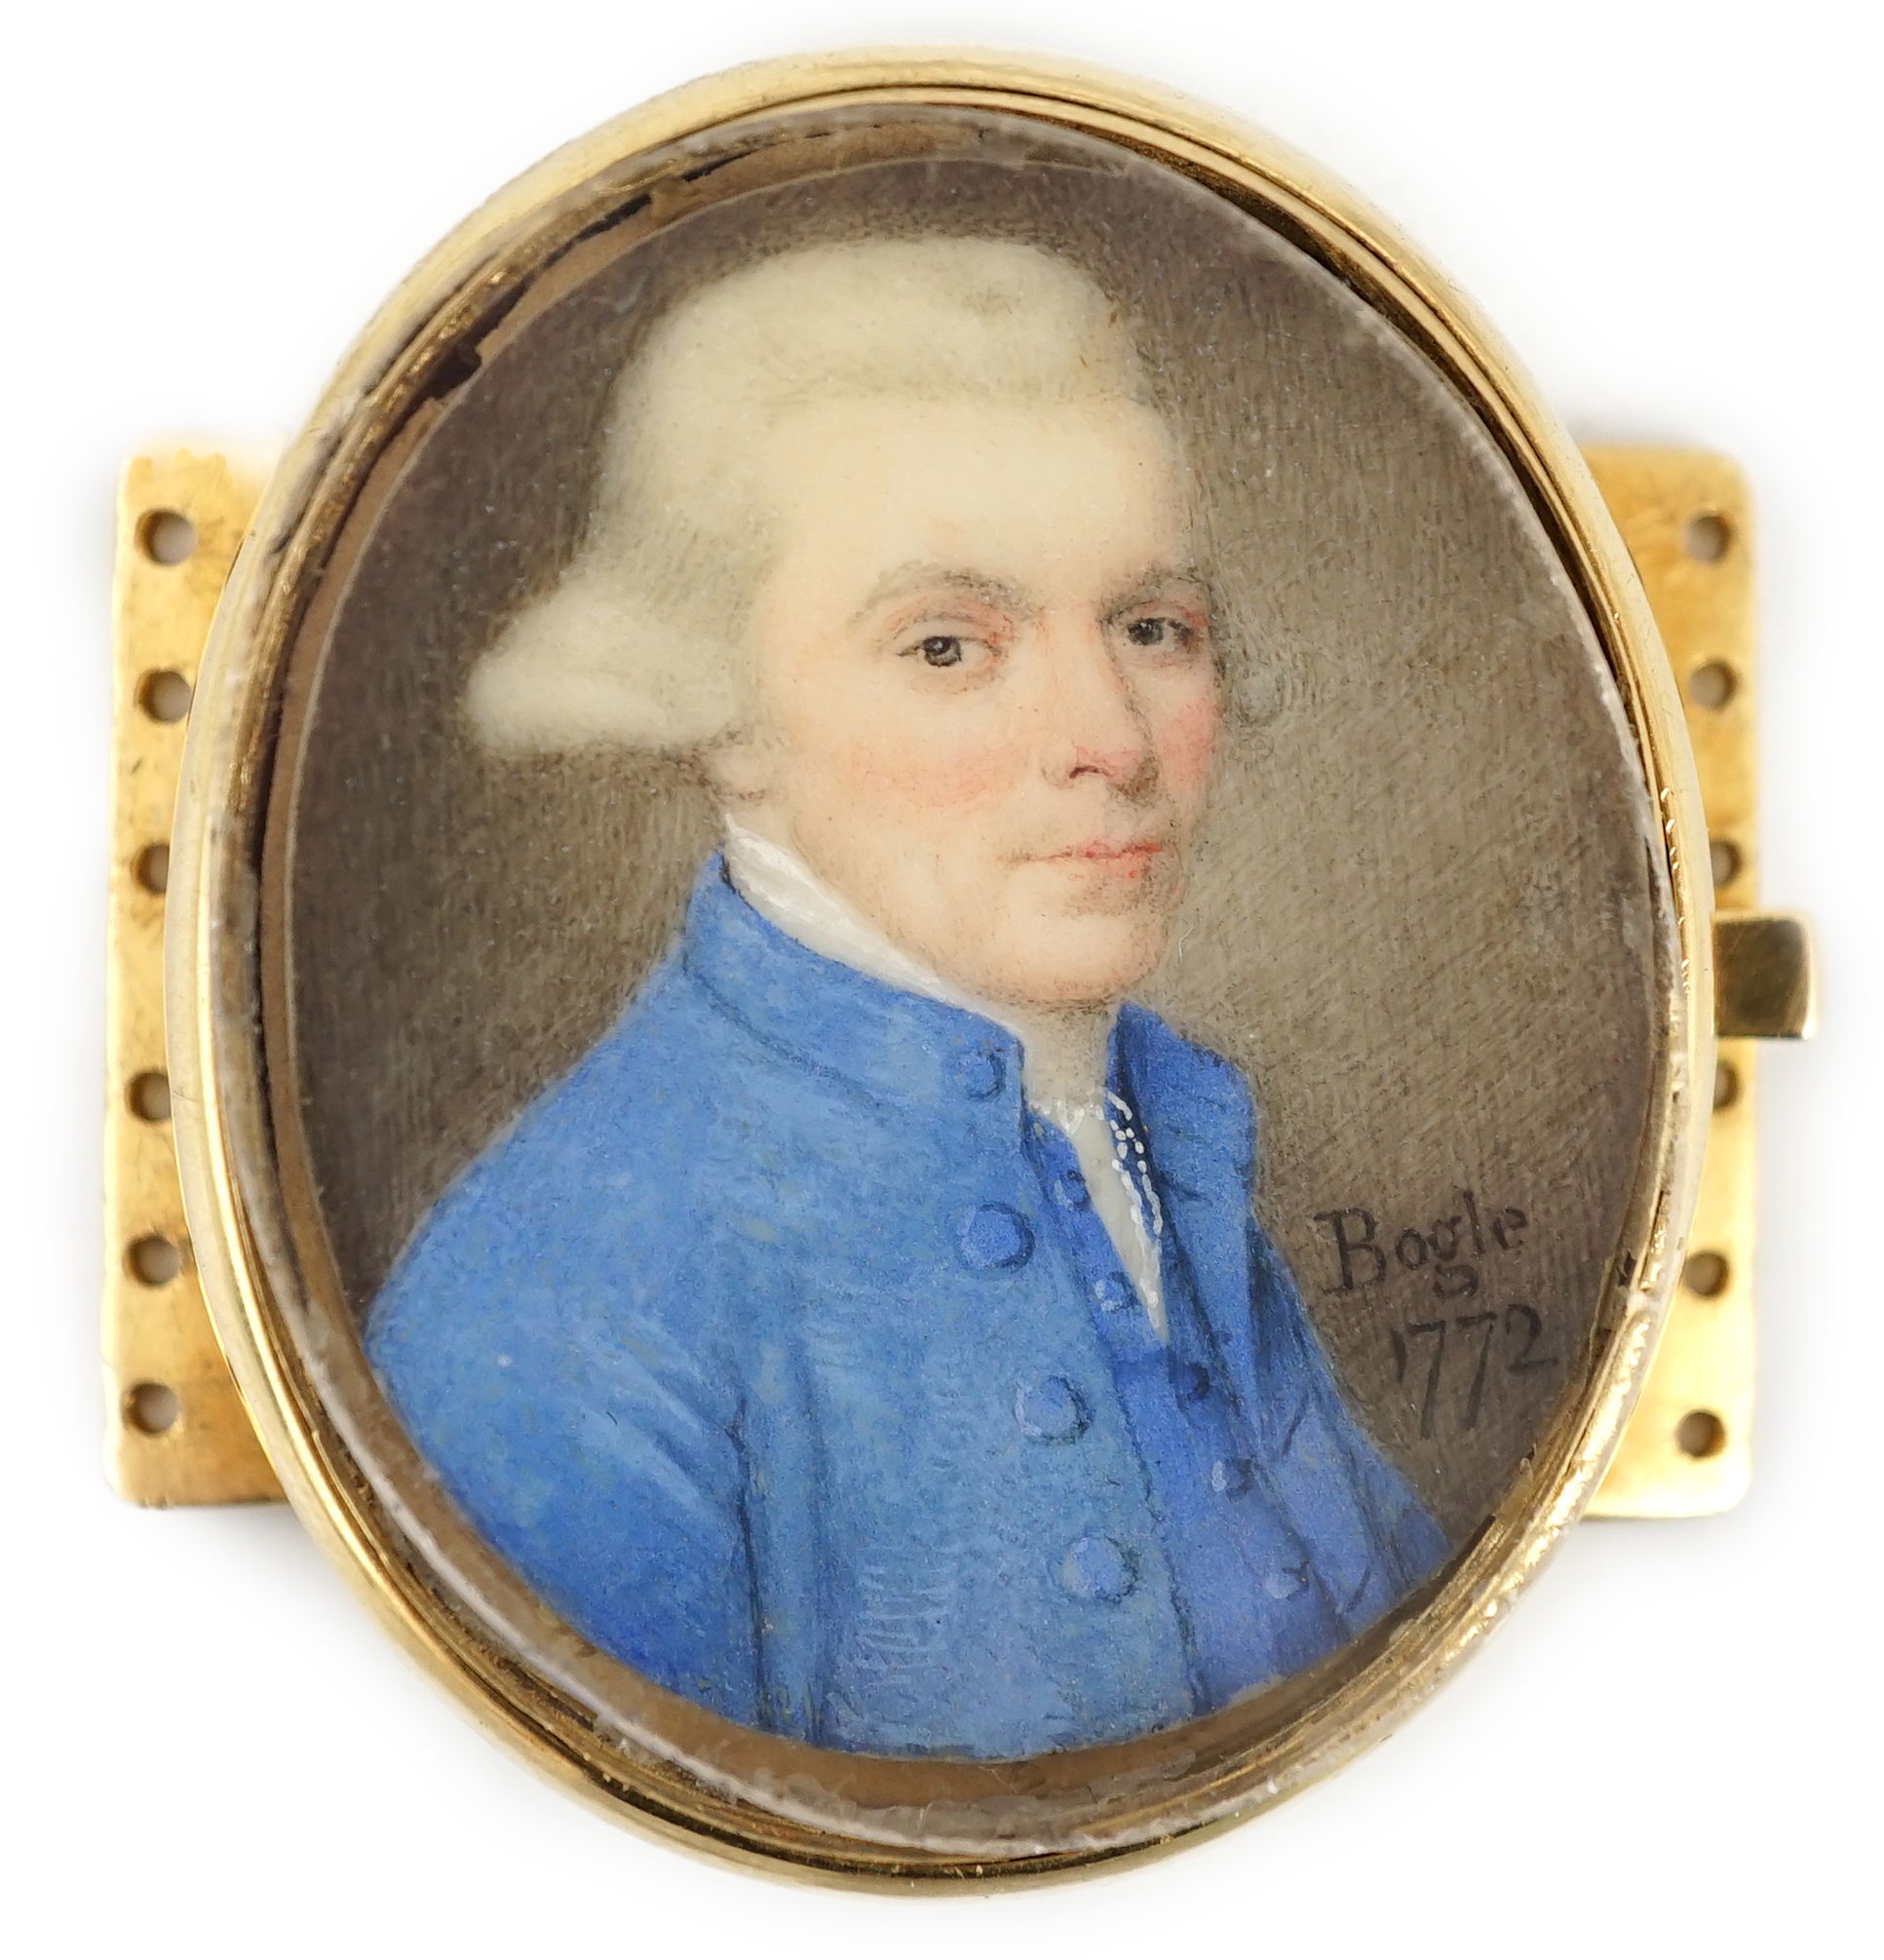 John Bogle (British, 1746-1803), Portrait miniature of a gentleman, oil on ivory, 3.6 x 3cm. CITES Submission reference WMZWN28S